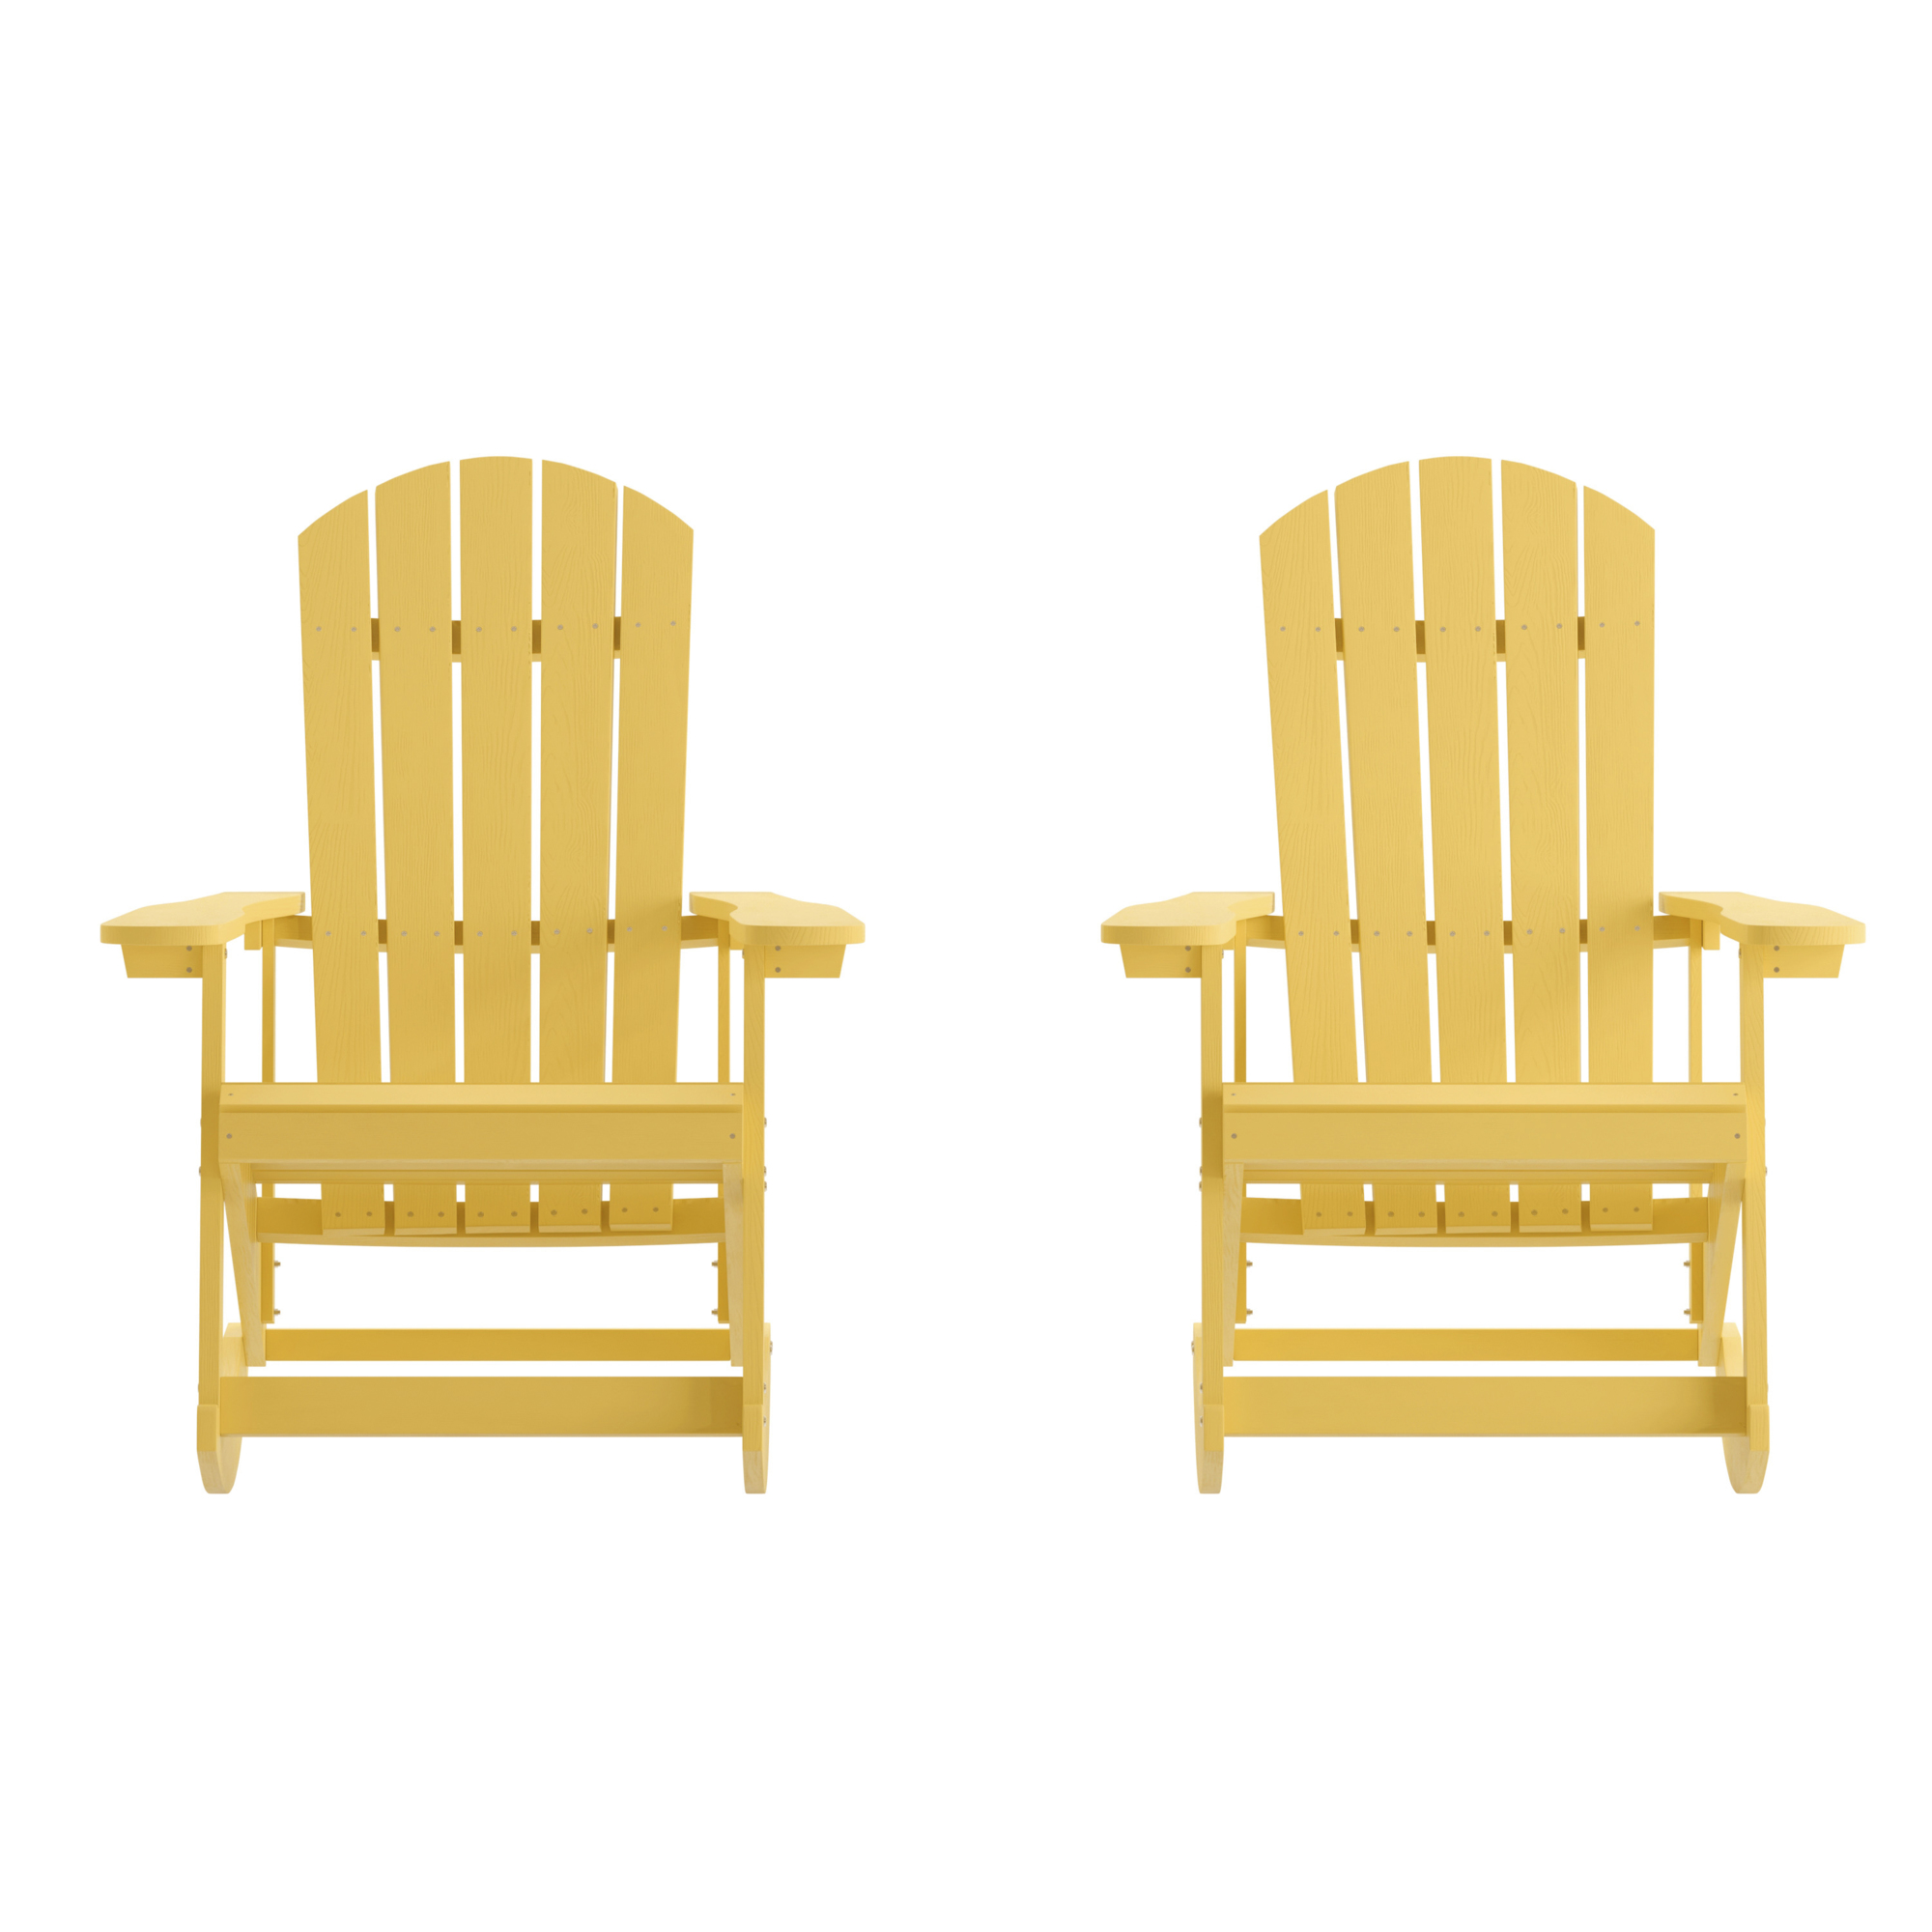 Flash Furniture, 2 PK White Poly Resin Adirondack Rocking Chairs, Primary Color Yellow, Material Polystyrene, Width 29.5 in, Model JJC14705YLW2